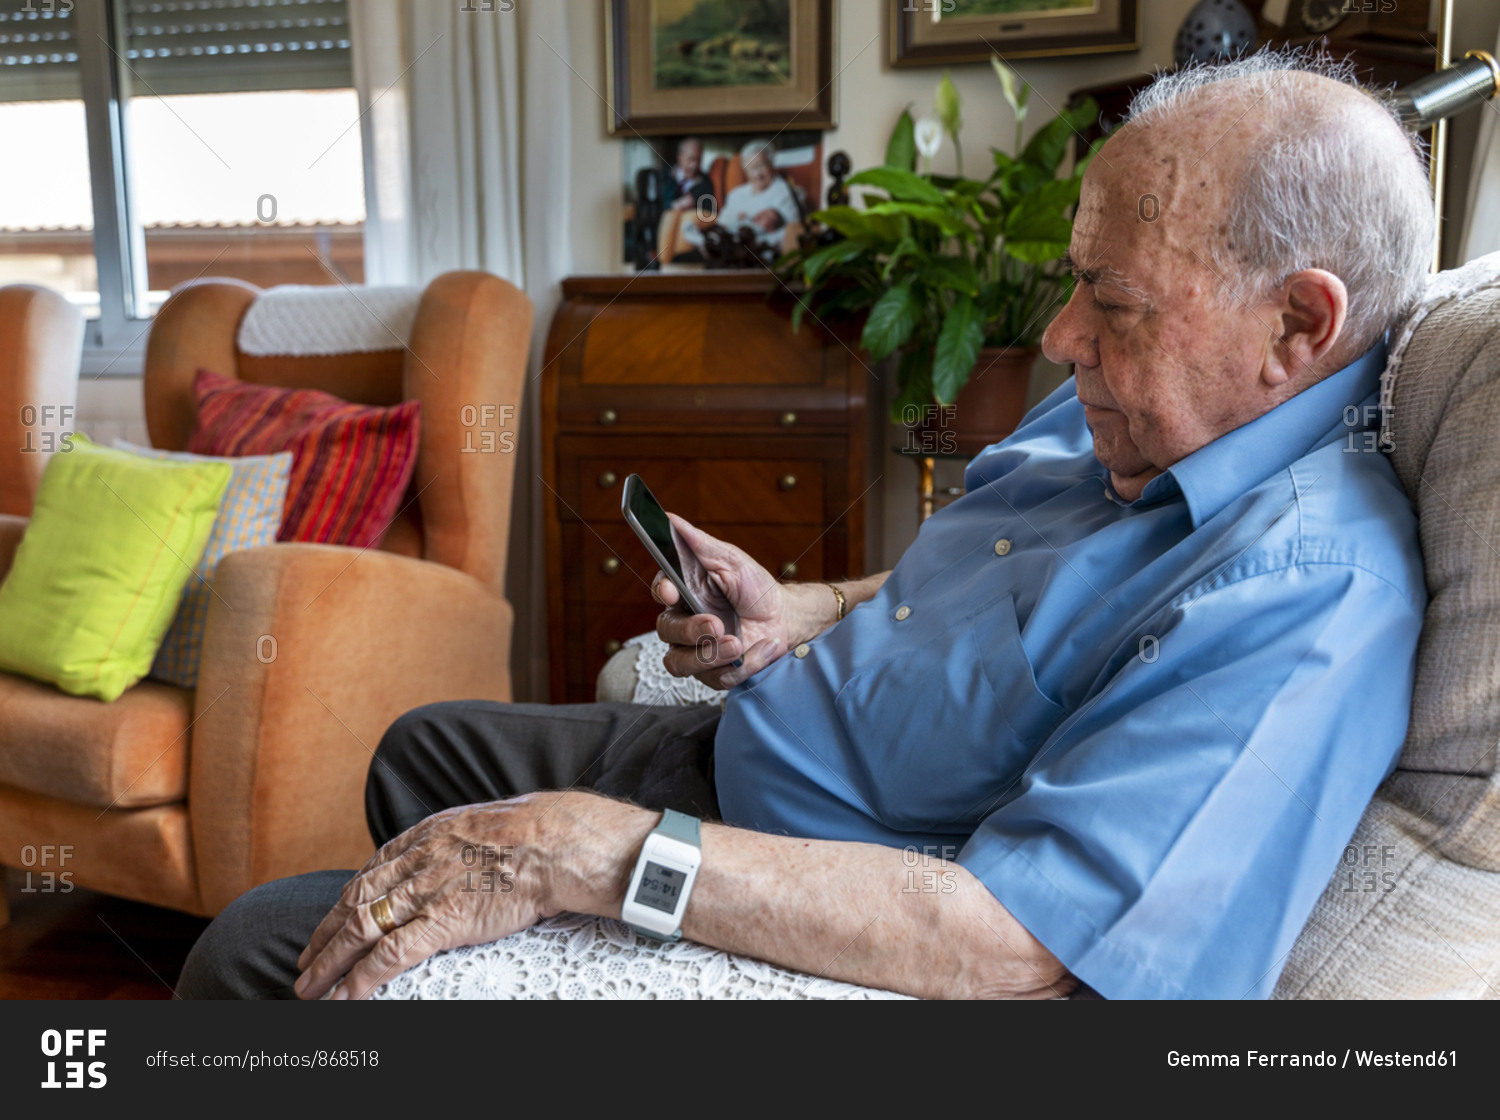 Elderly man using a mobile phone and wearing a smart emergency alarm bracelet around wrist at home